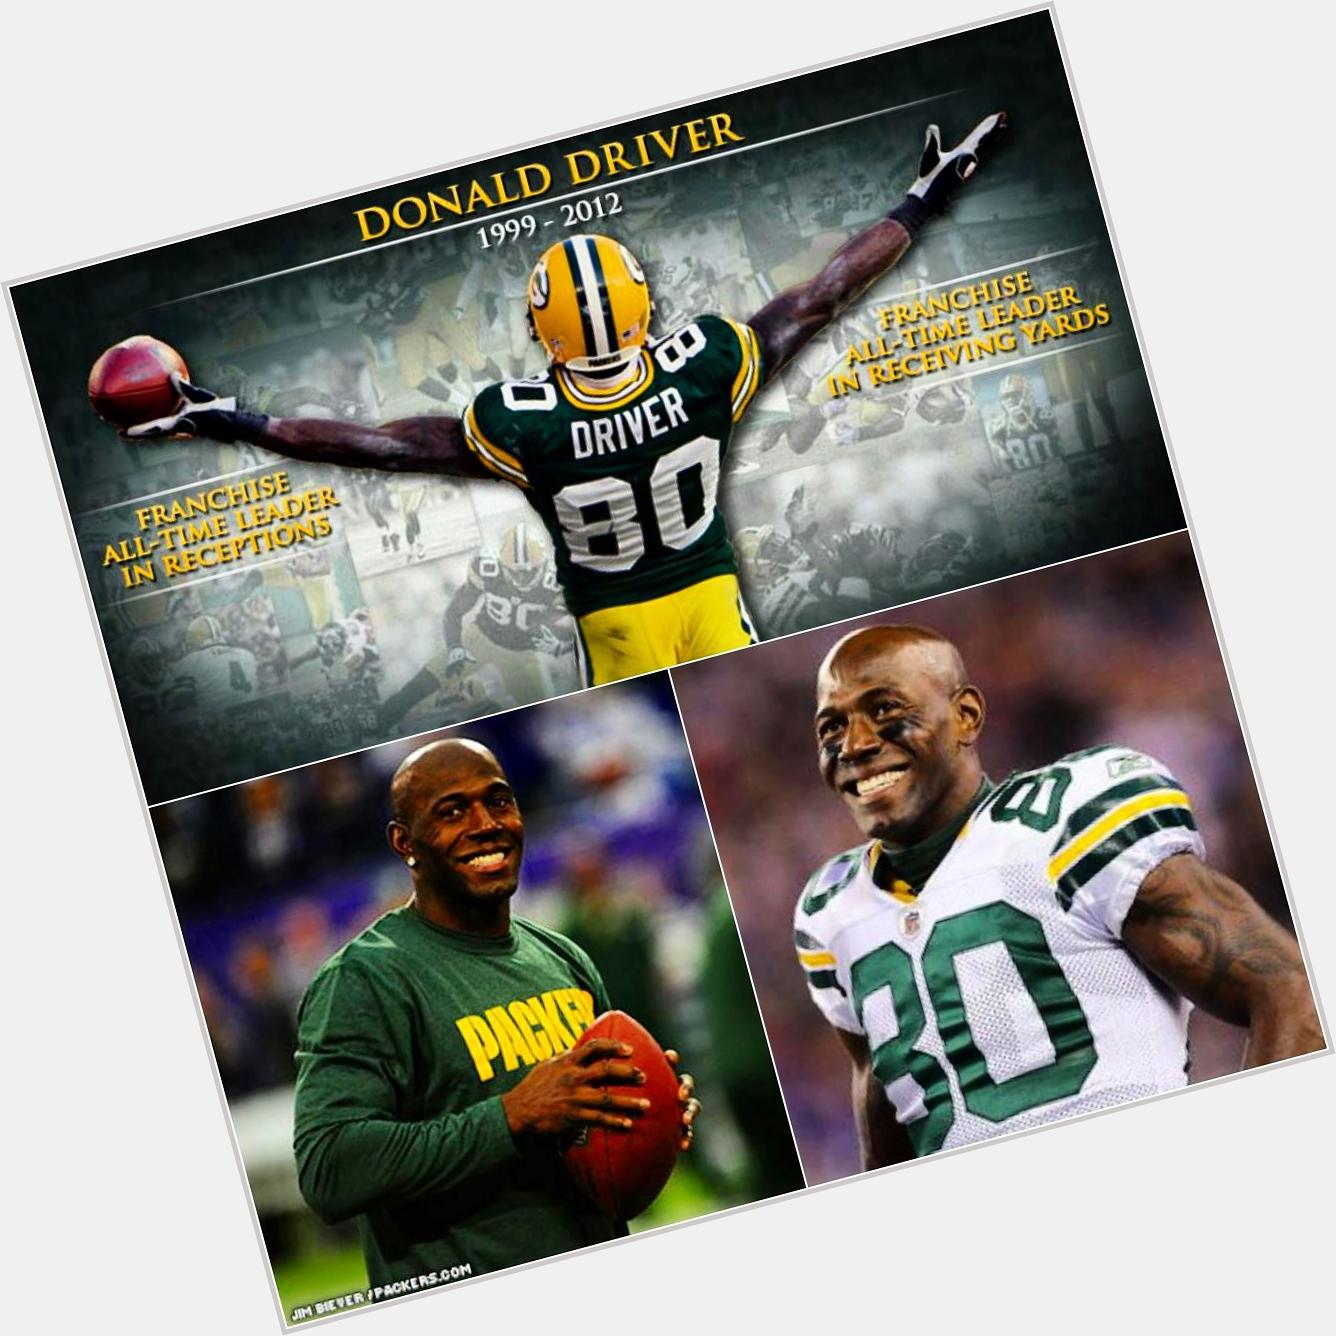 Happy Birthday to Donald Driver! (: that smile just makes my heart melt   